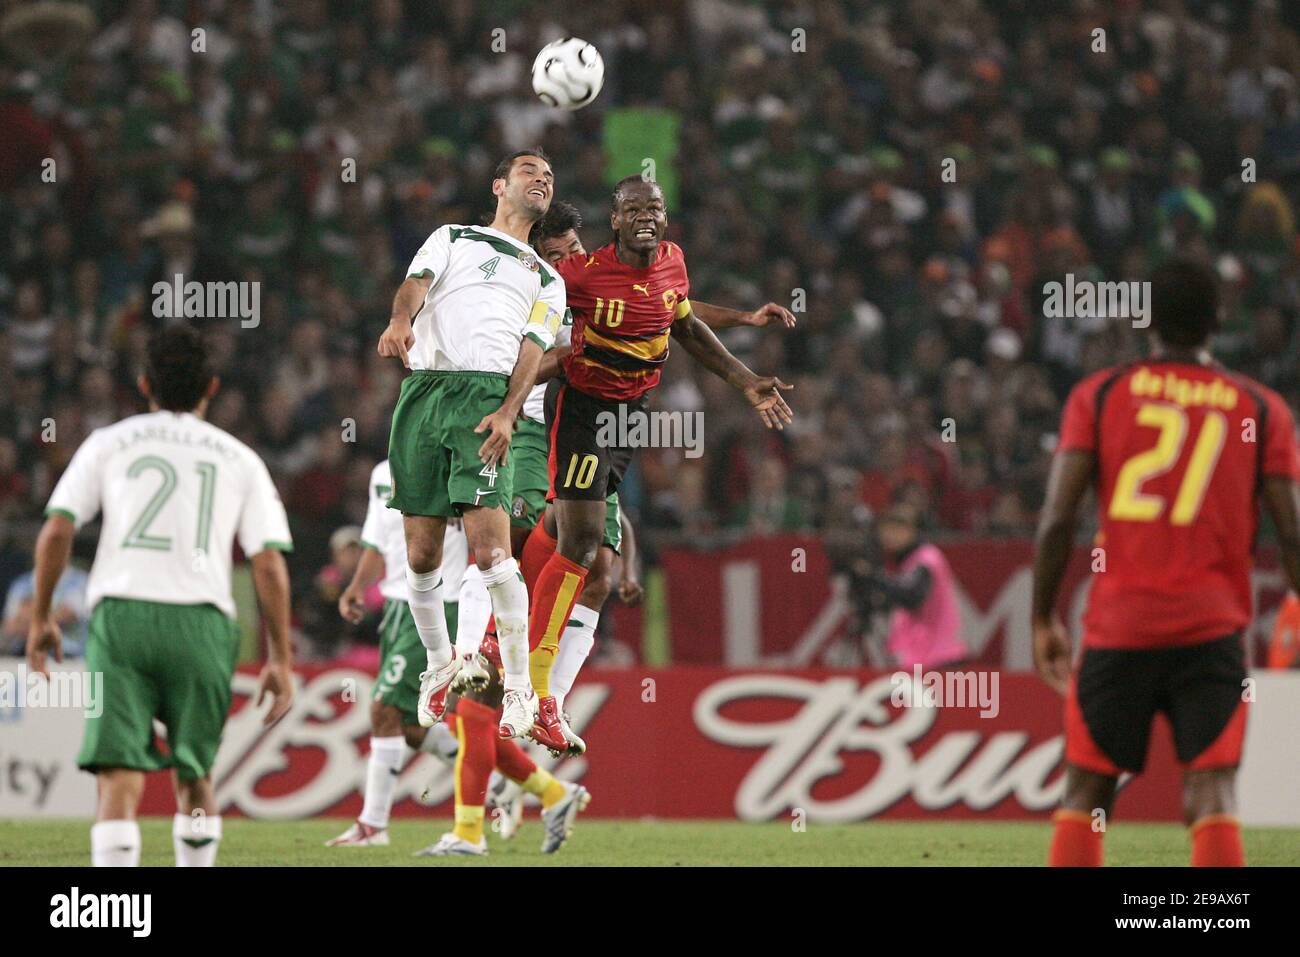 Mexico's Rafael Marquez and Angola's Akwa battle for the ball during the World Cup 2006-Group D, Angola vs Mexico, in Hanover, Germany, on June 16, 2006.The match ended in a draw 0-0. Photo by Gouhier-Hahn-Orban/Cameleon/ABACAPRESS.COM Stock Photo